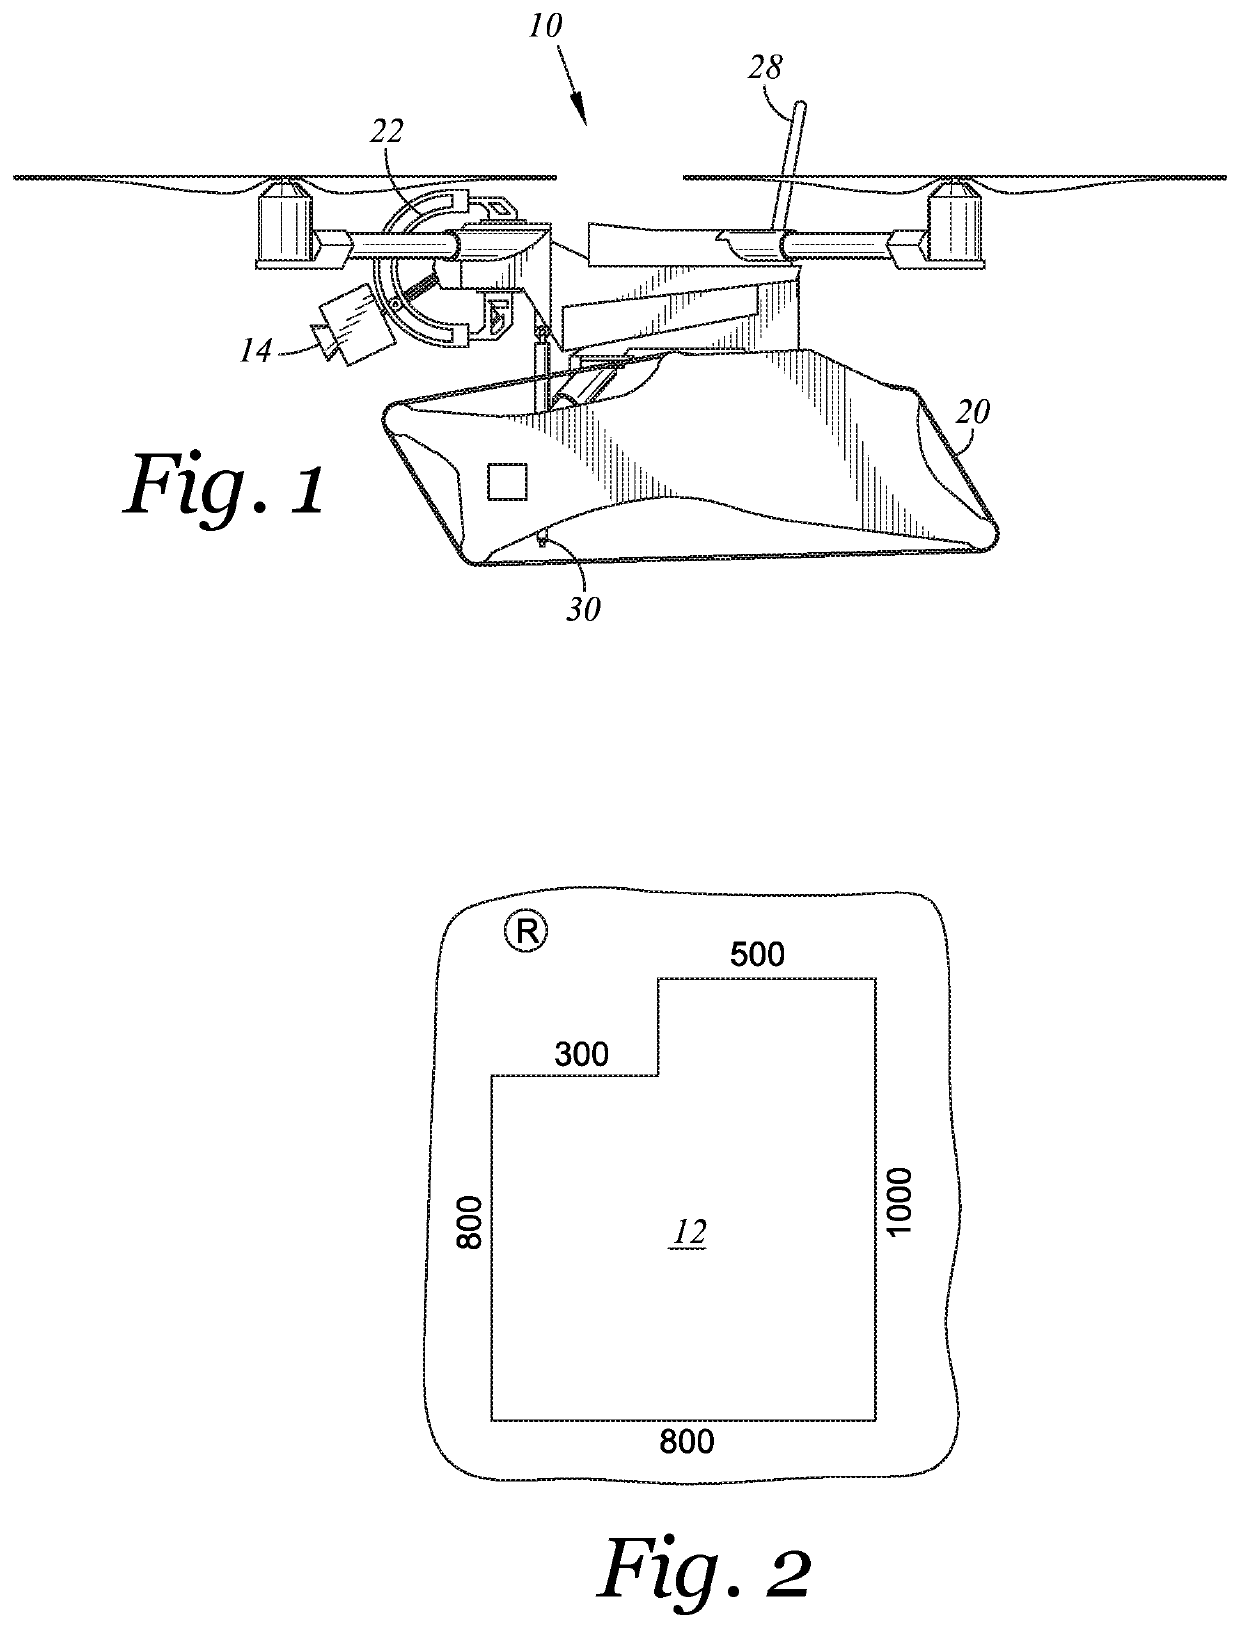 Method of Crop Analysis using Drone with Flying and Driving Capability